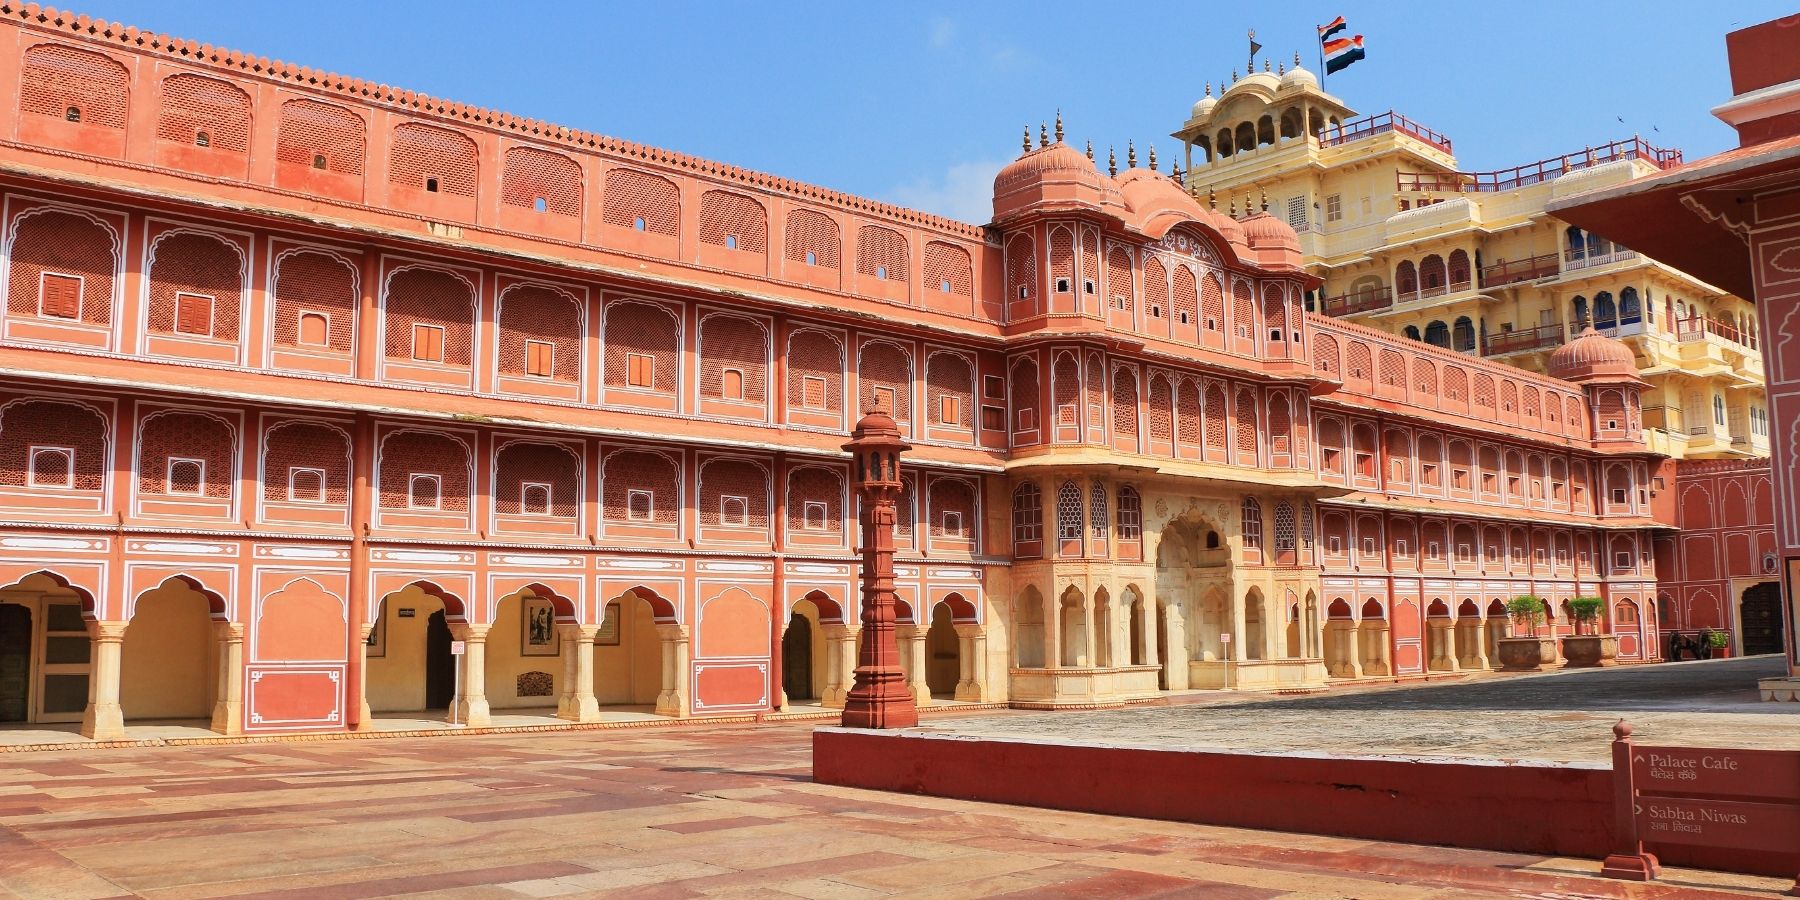 History of royal palaces of India and their survival